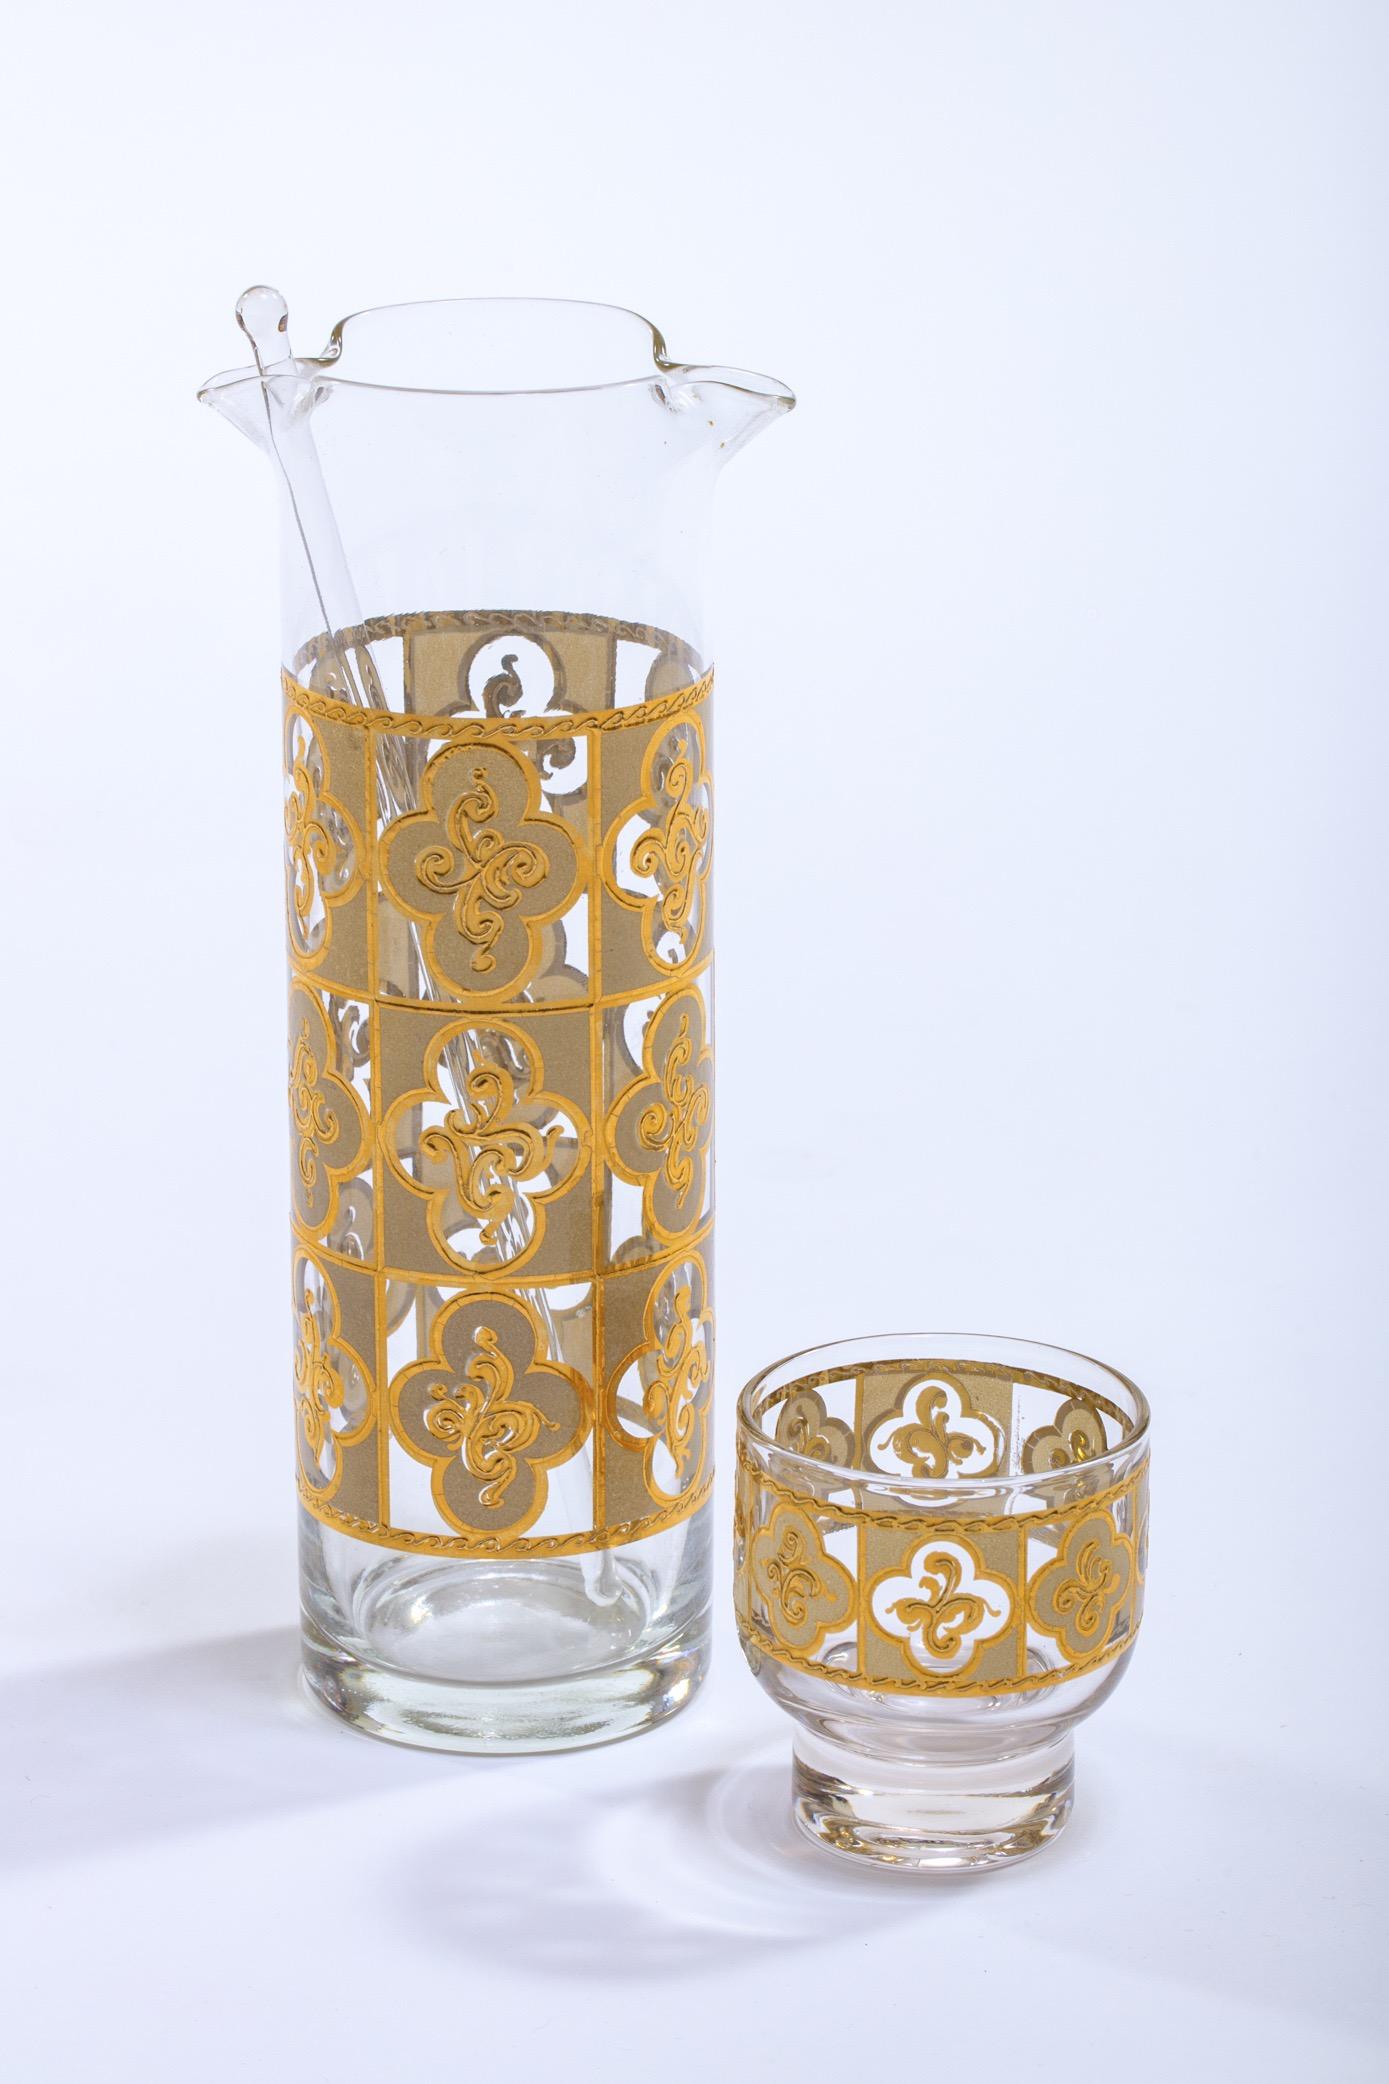 22-karat gold printed cocktail mixer and matching set of 6 cocktail glasses in a rare Tudor like style, circa 1970. The set is in great condition with little to no wear. Beautiful addition to any bar or bar cart, or the perfect unique gift for a